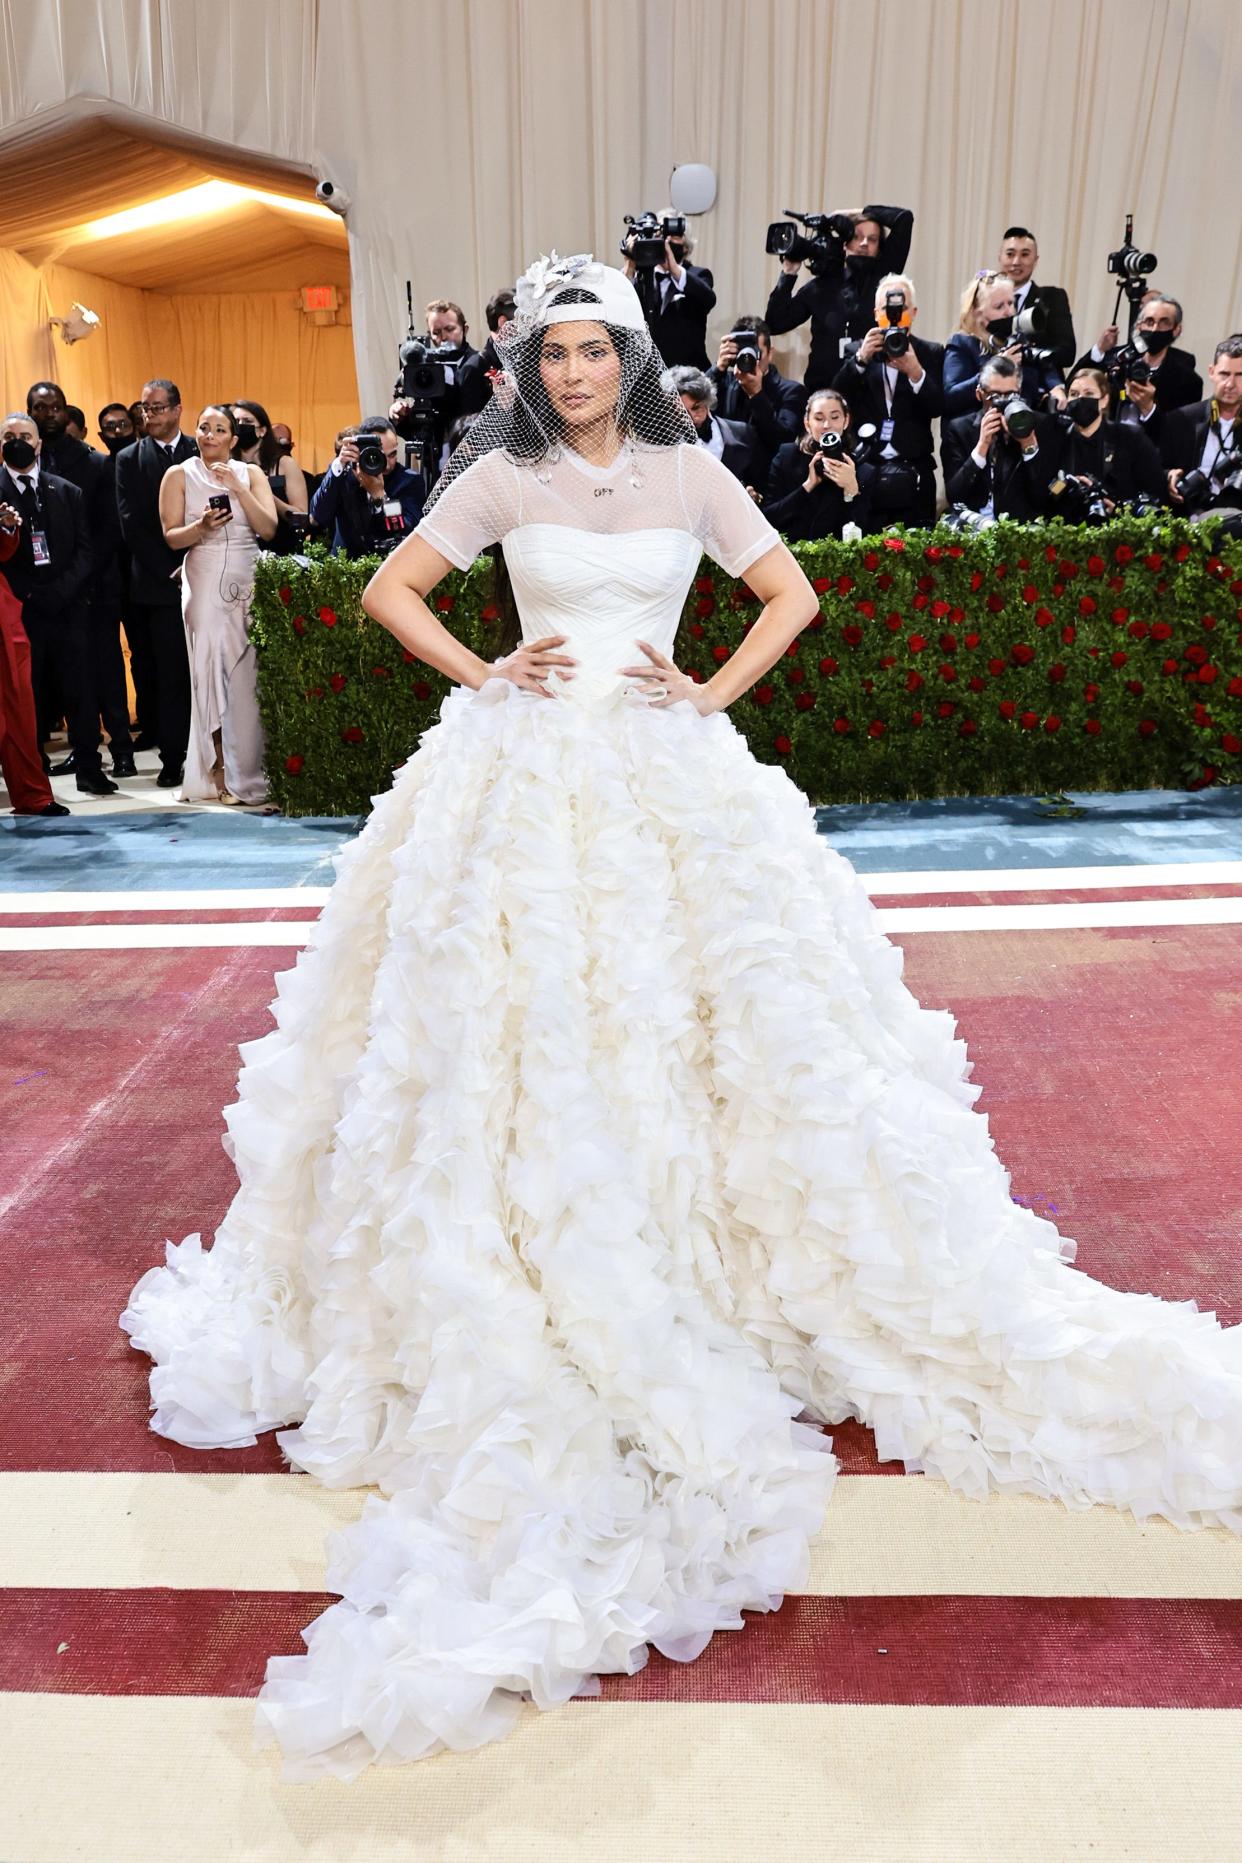 Kylie Jenner attends the 2022 Met Gala in a bridal-inspired look: A dress with a large white skirt, a sheer t-shirt style top, and a white baseball cap with a white birdcage veil.